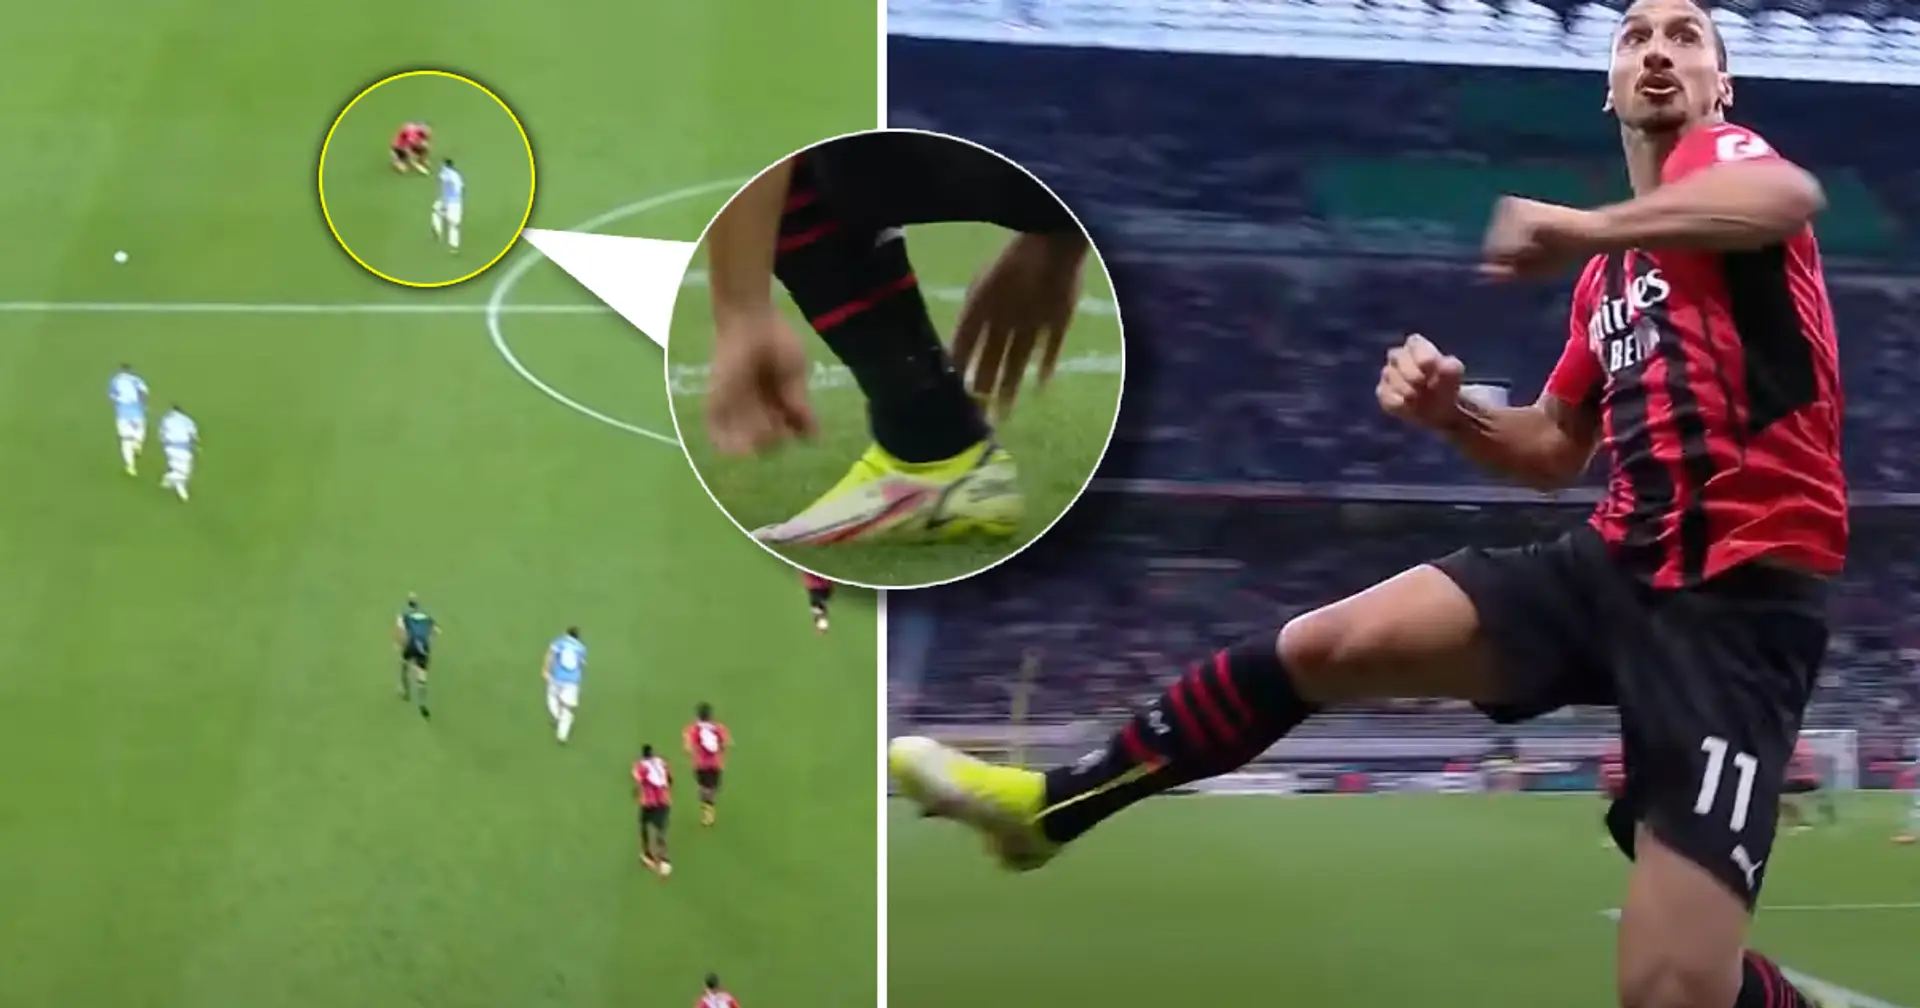 Zlatan Ibrahimovic scores goal with his boots untied - he turns 40 next month